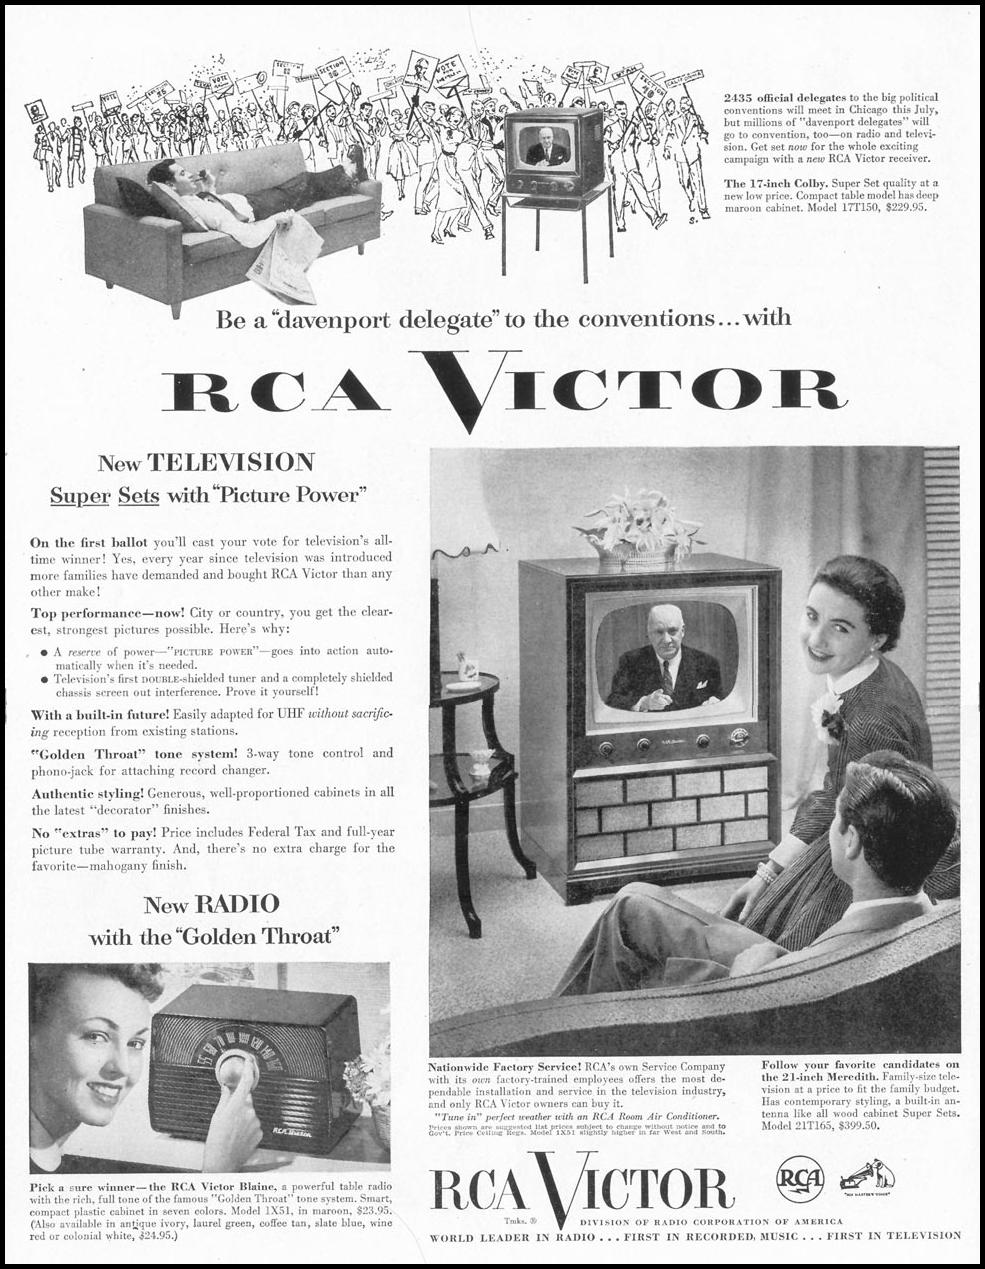 RCA VICTOR TELEVISION
LIFE
06/16/1952
p. 32